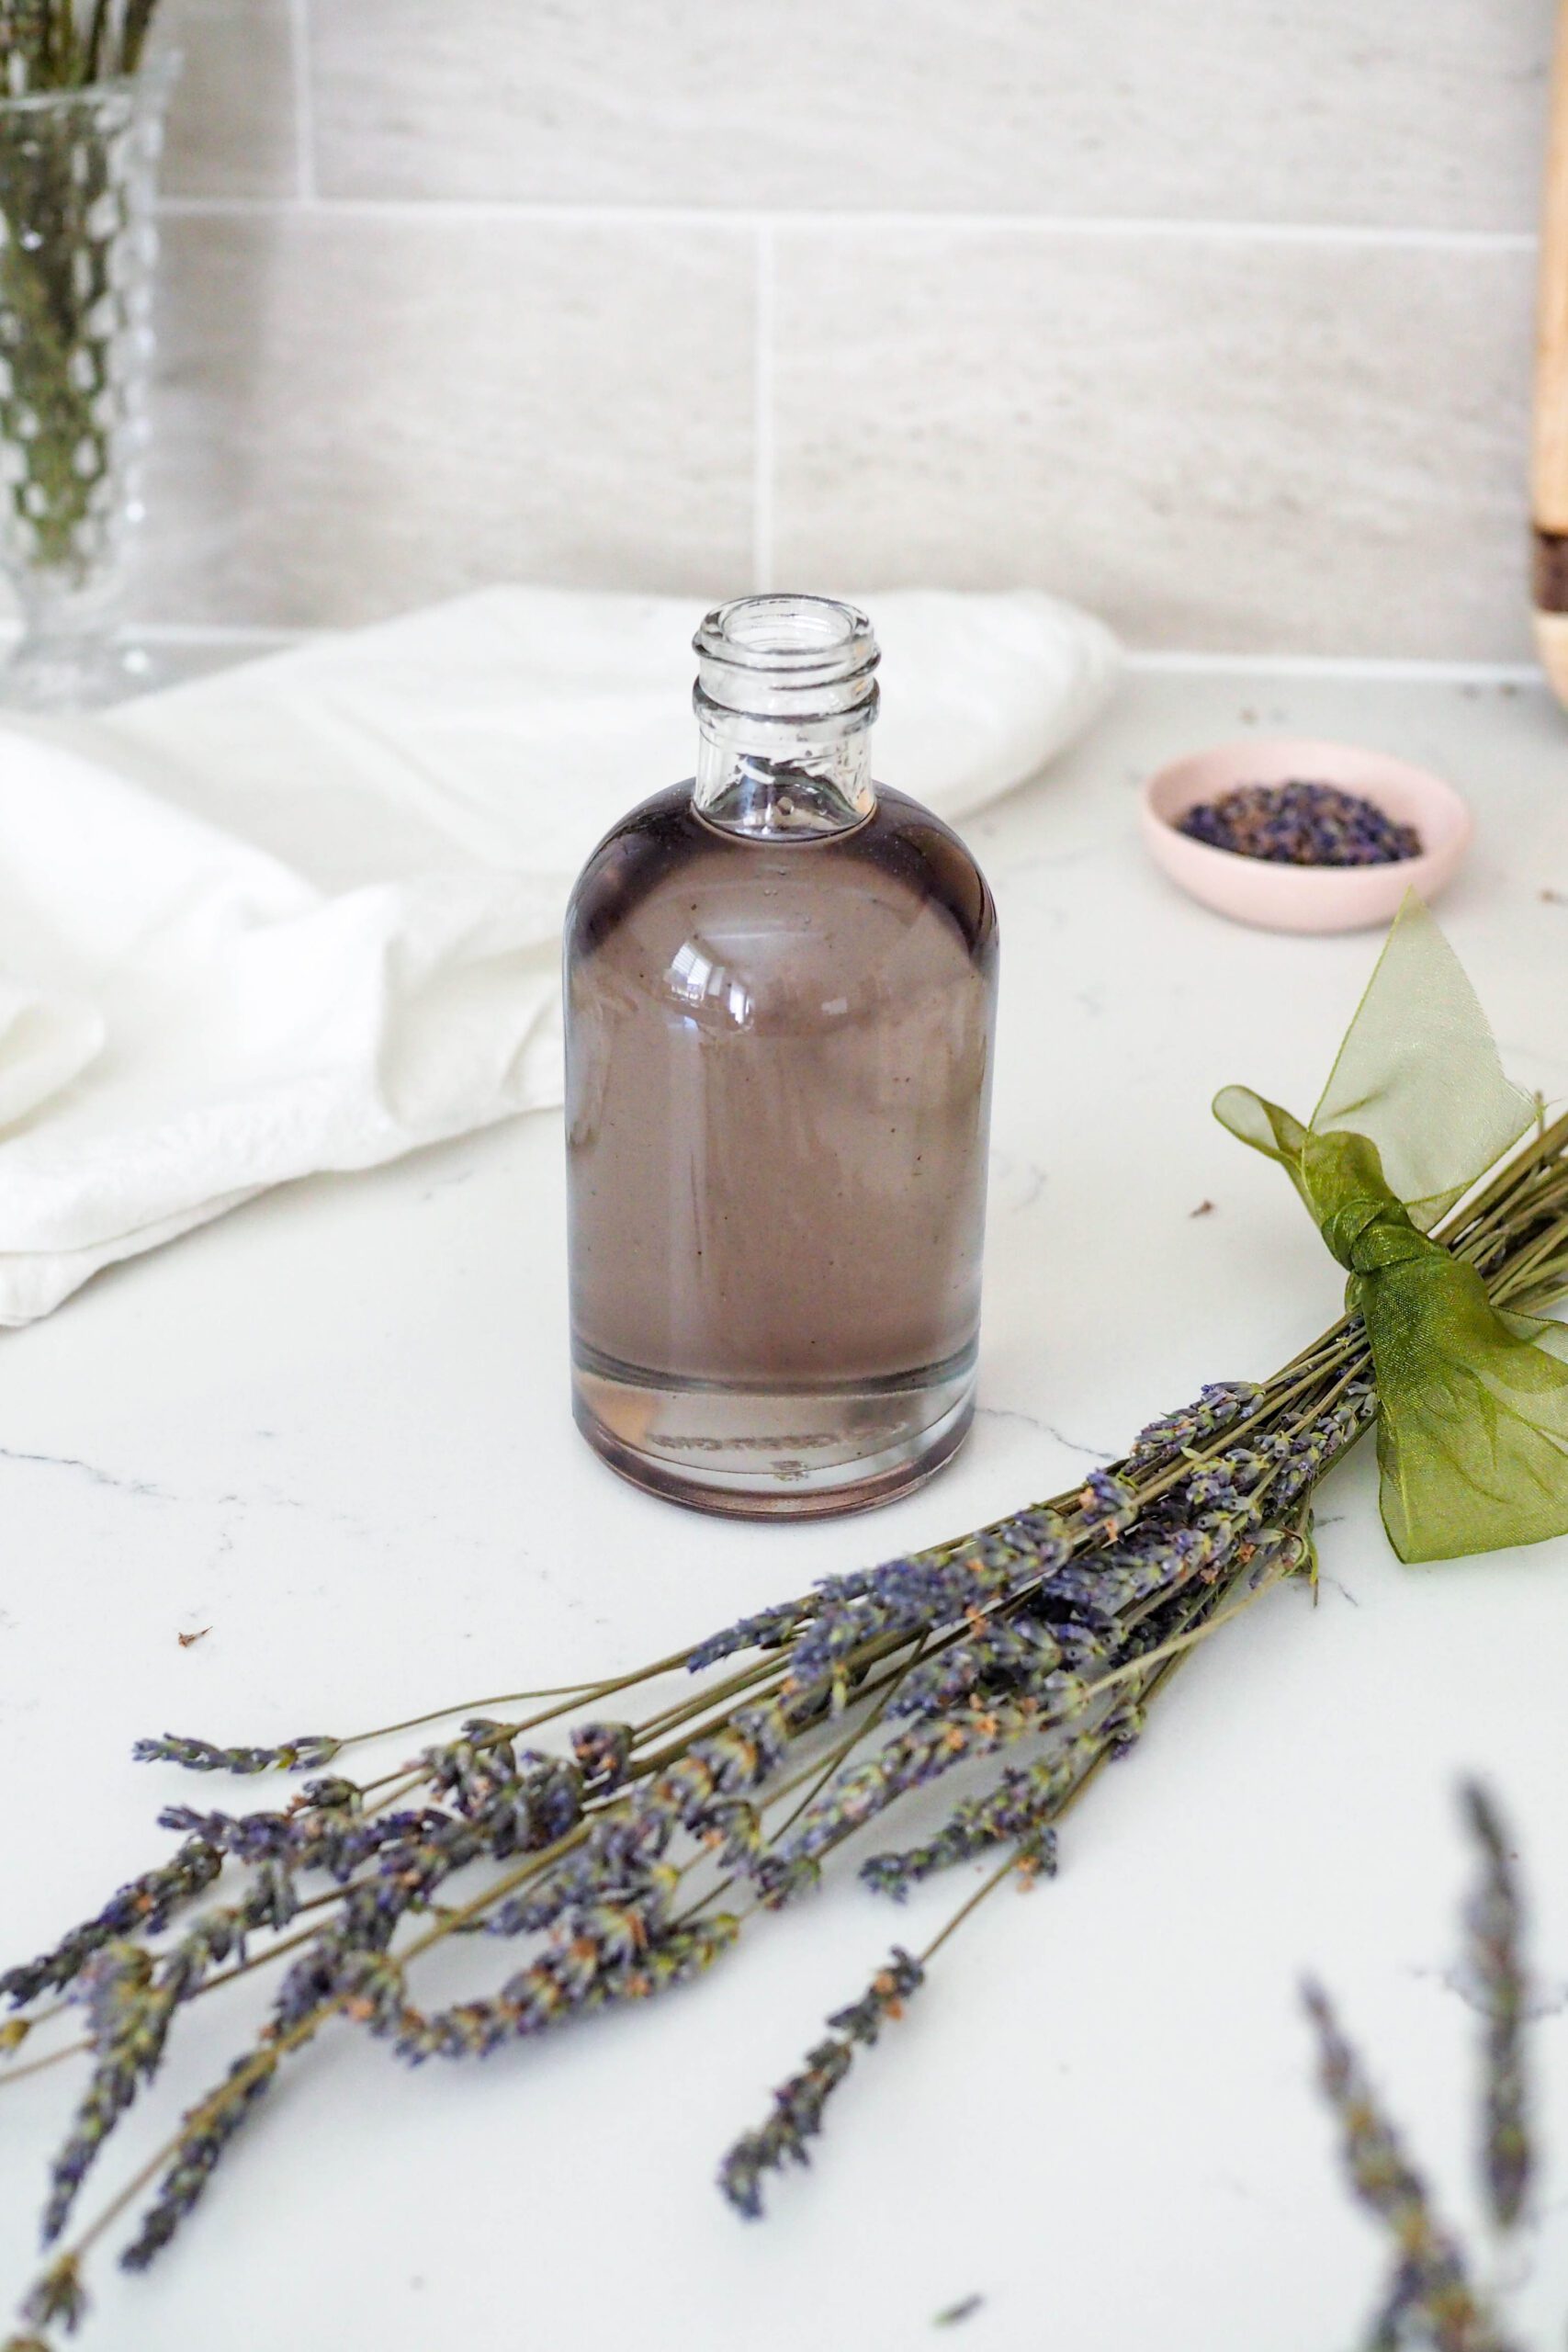 A bottle of lavender simple syrup on a counter near dried lavender sprigs.